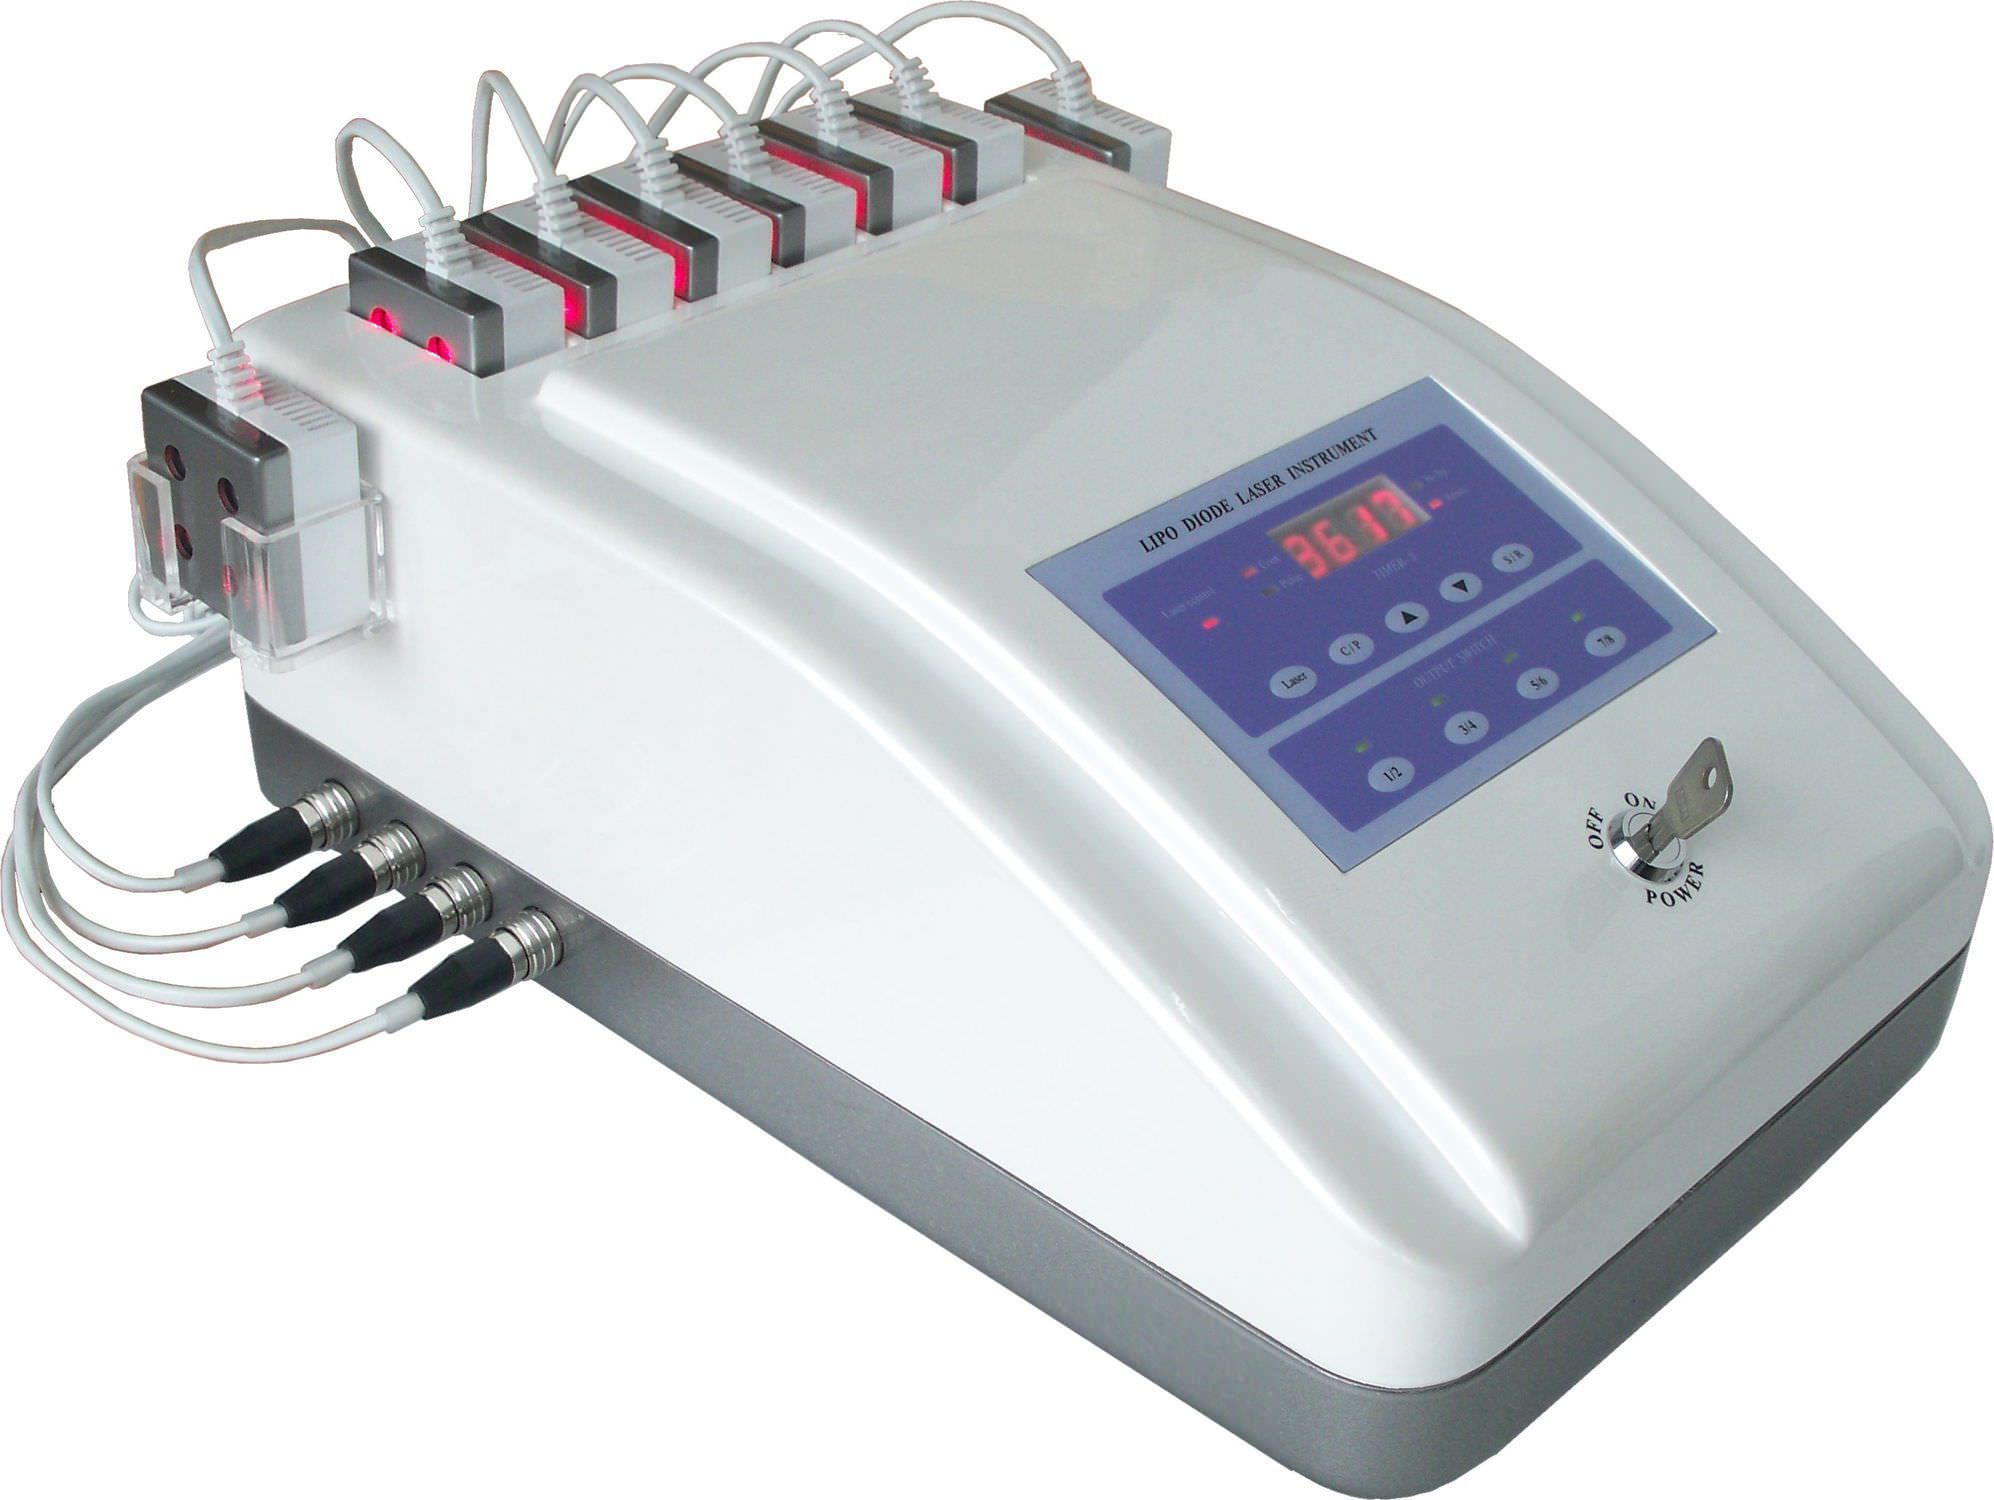 Lipolysis laser / diode / tabletop MDL 100N-8 Sunny Optoelectronic